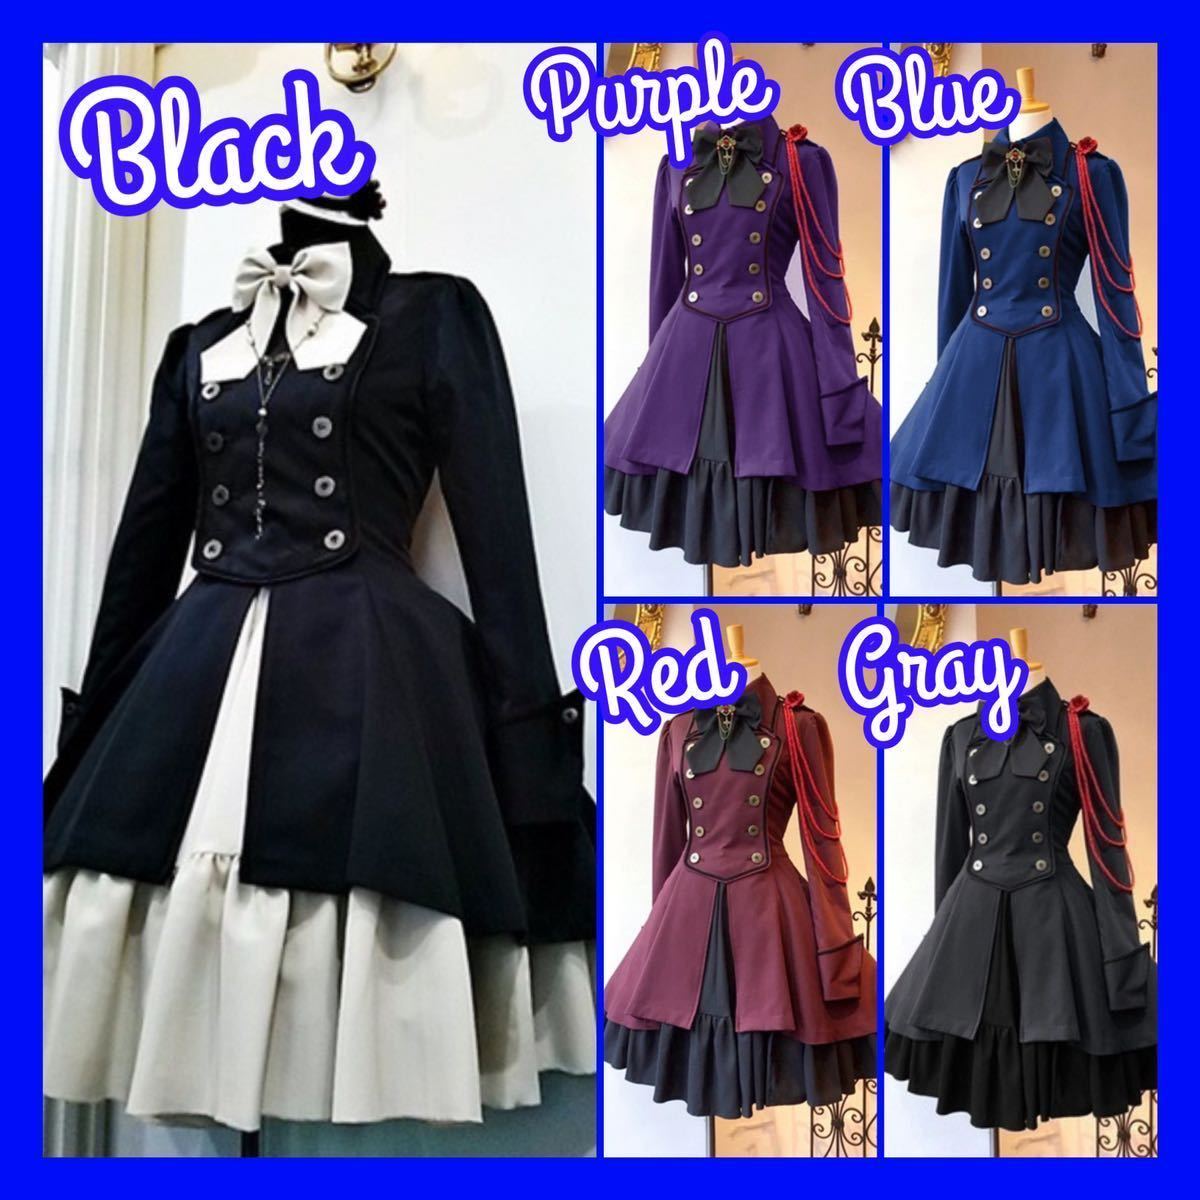  knees height One-piece military uniform Lolita One-piece Gothic and Lolita dress costume play clothes dress purple violet purple M